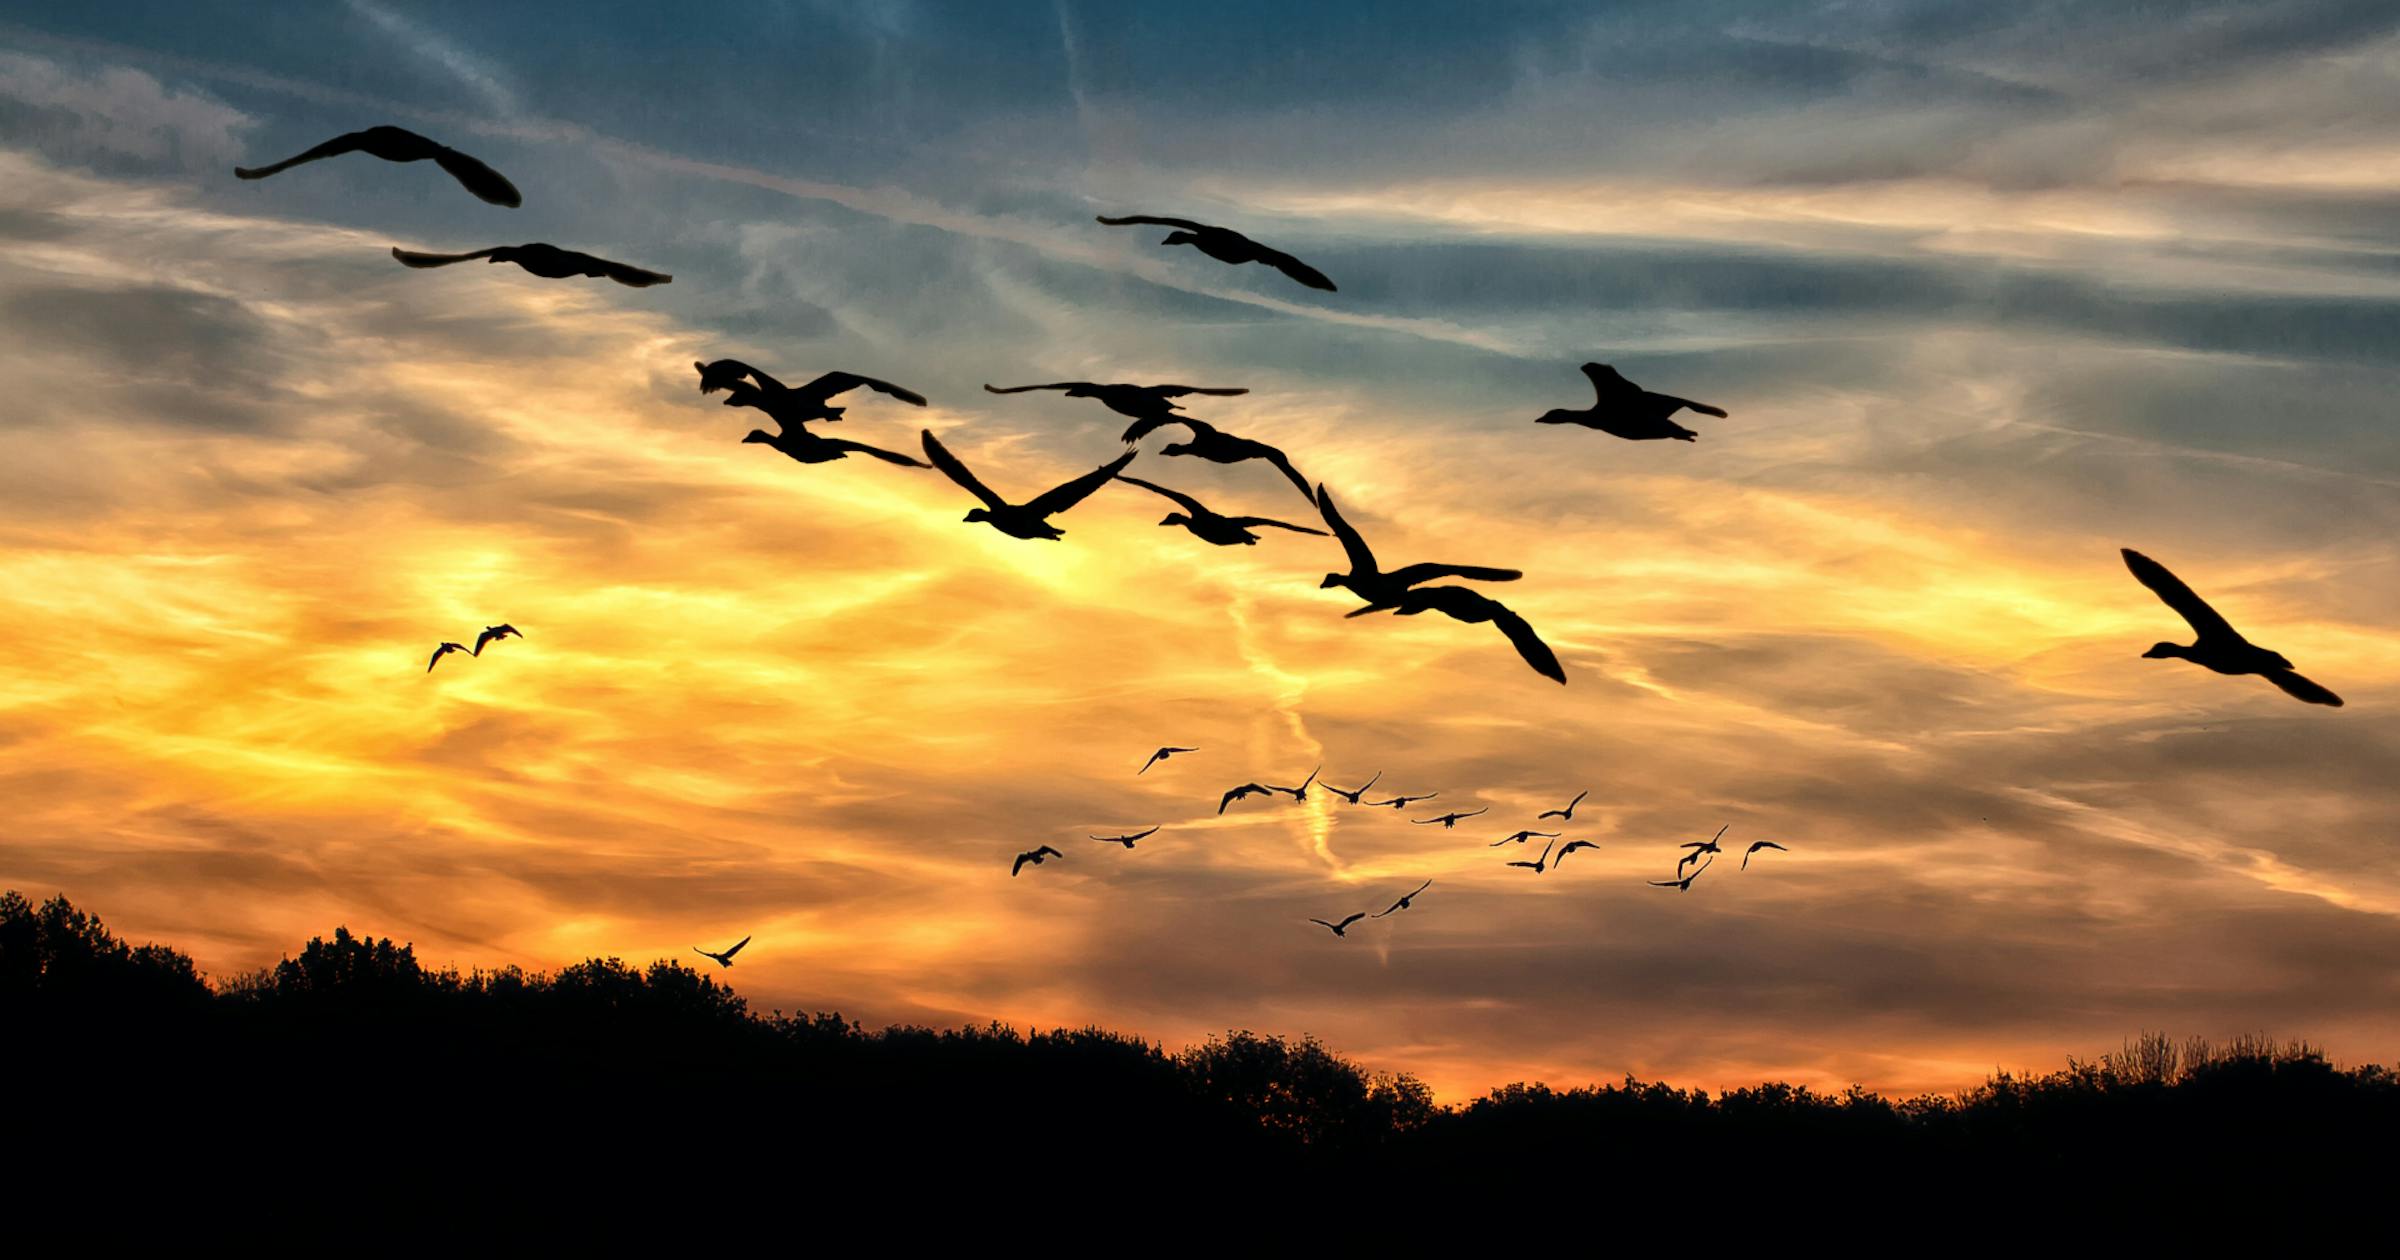 Geese flying in a golden sky 